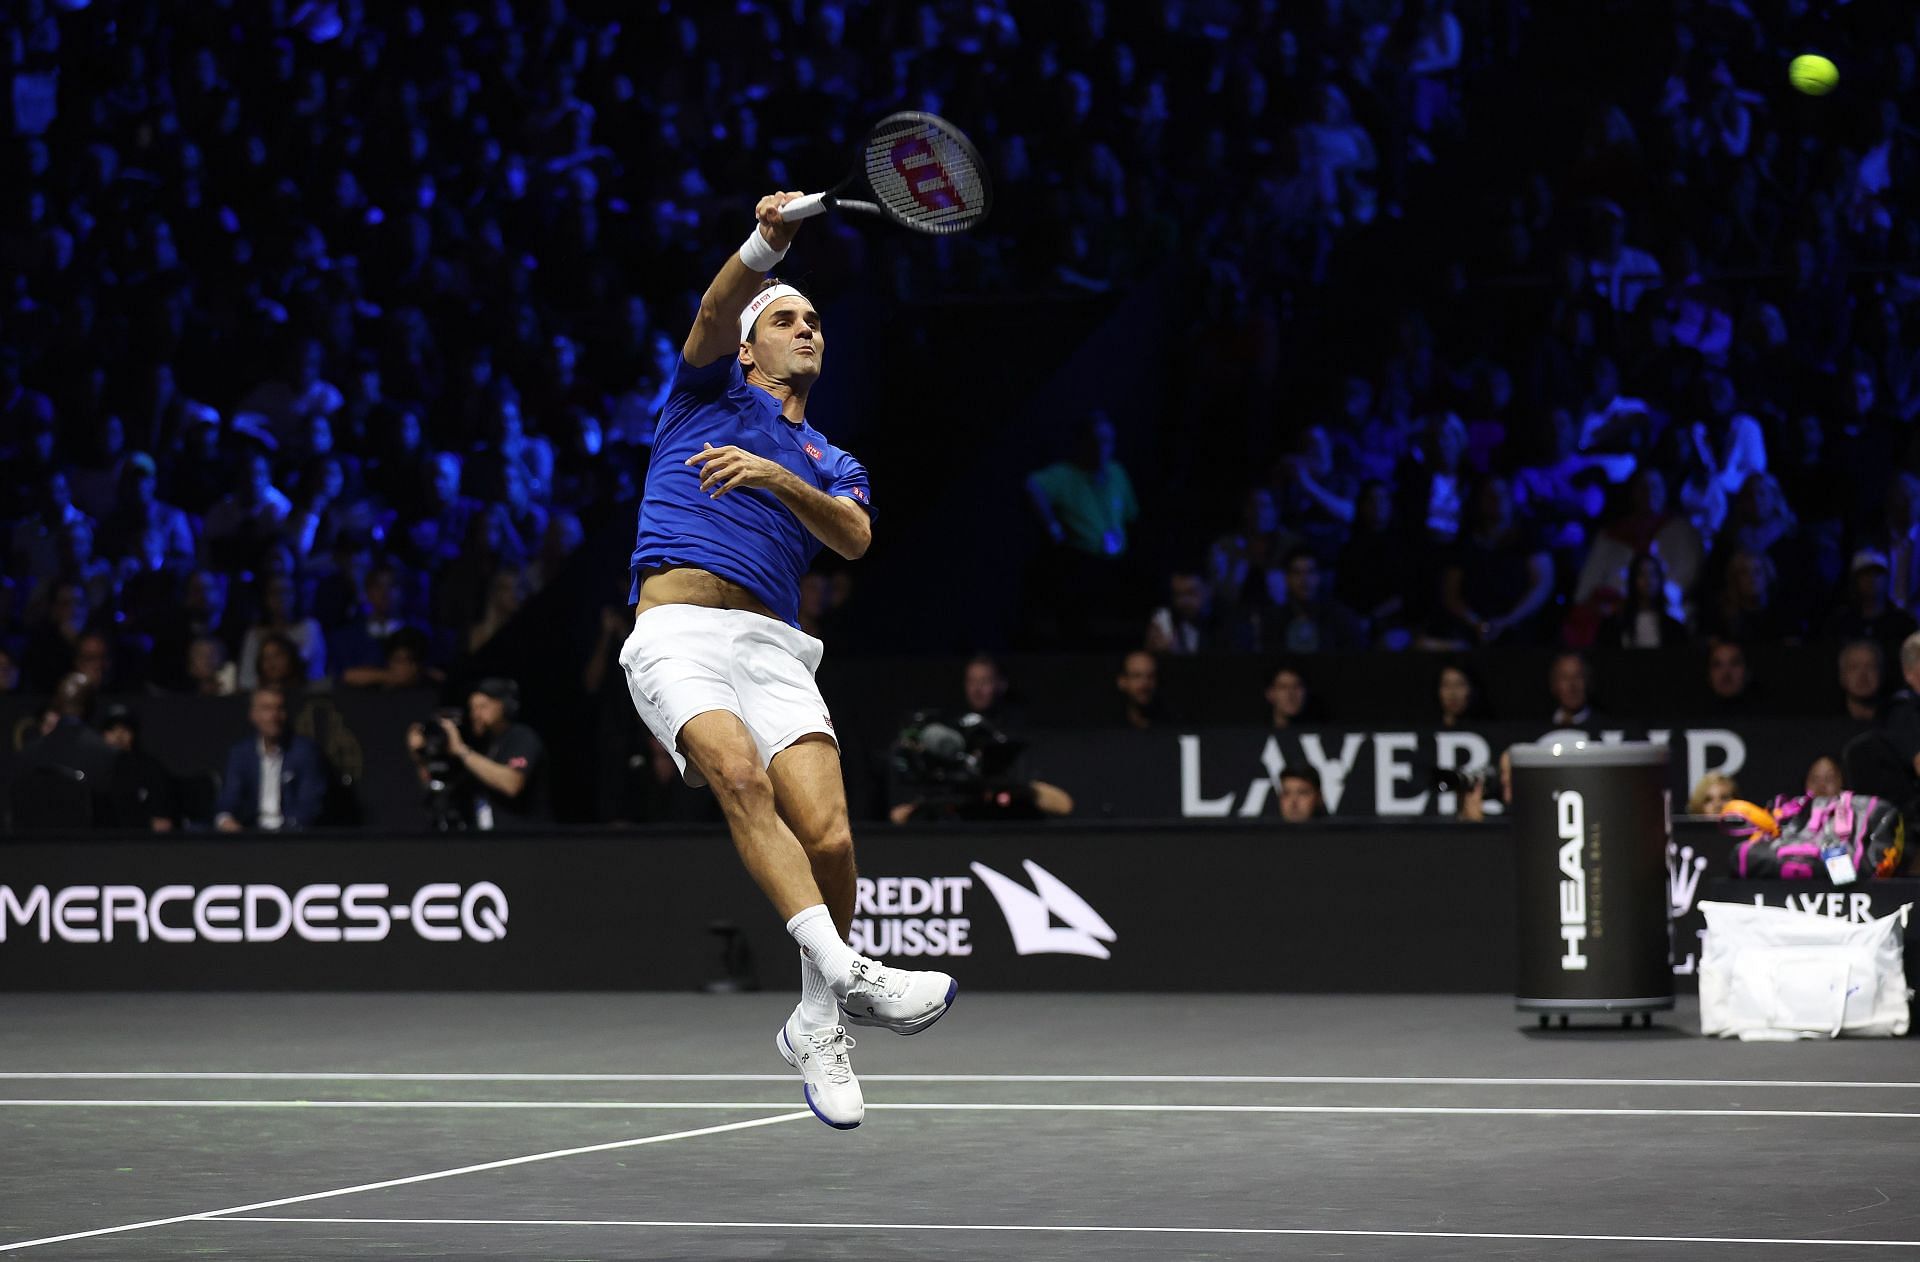 Roger Federer in action at the 2022 Laver Cup